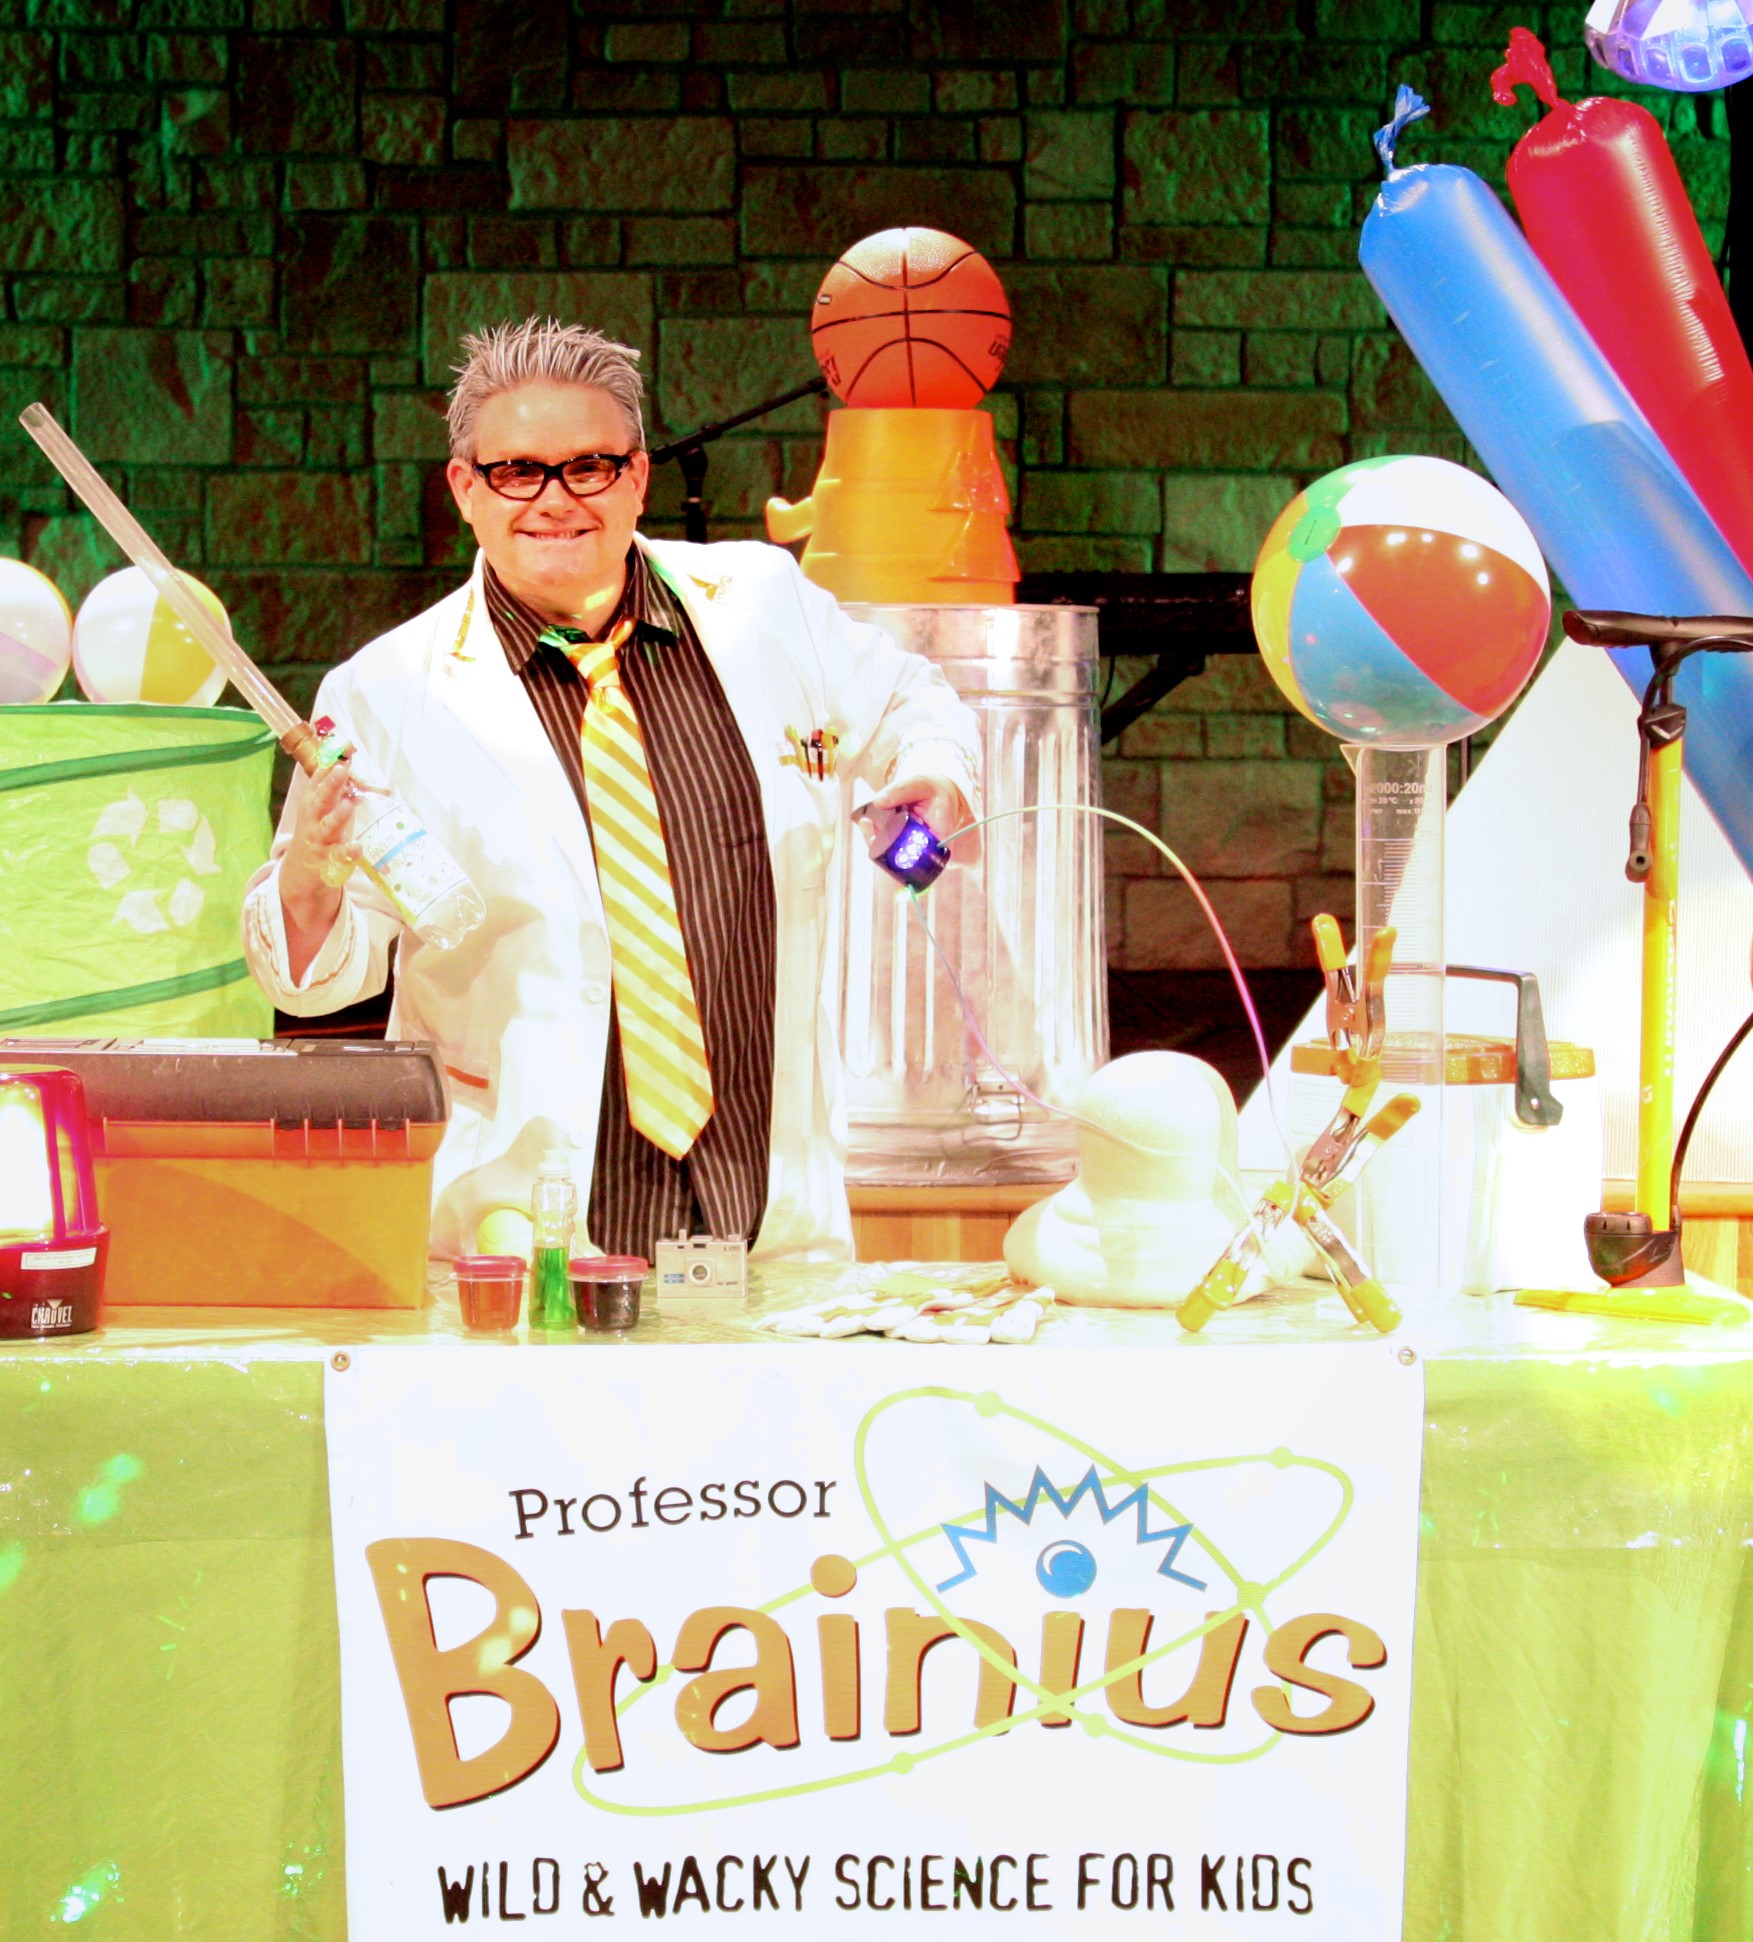 professory brainius at a table of science items